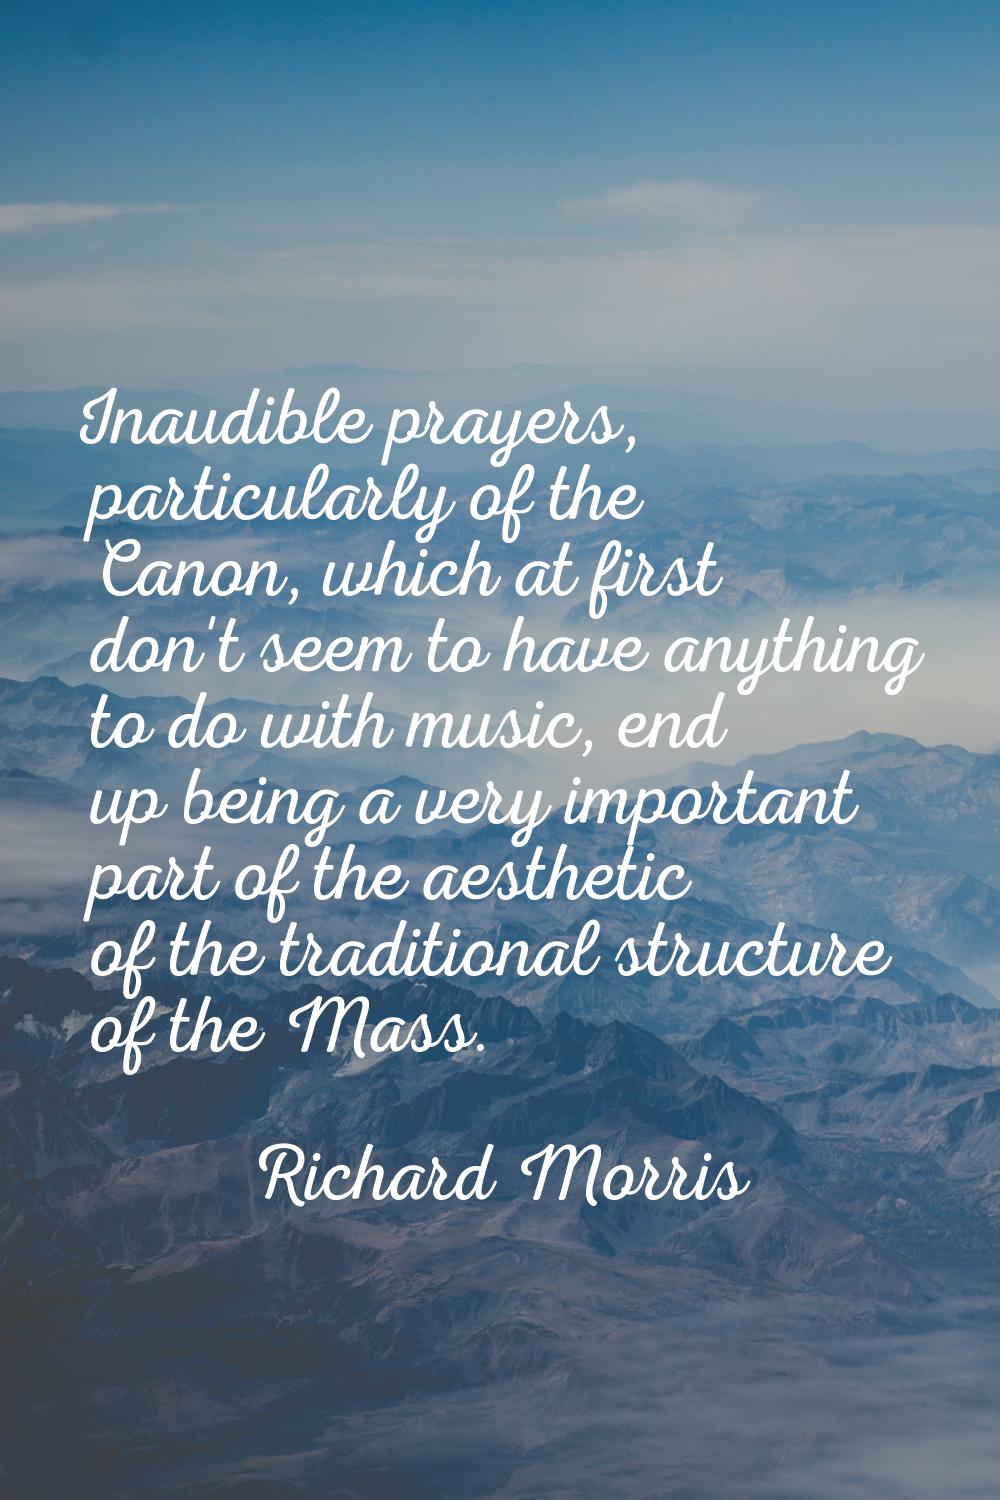 Inaudible prayers, particularly of the Canon, which at first don't seem to have anything to do with